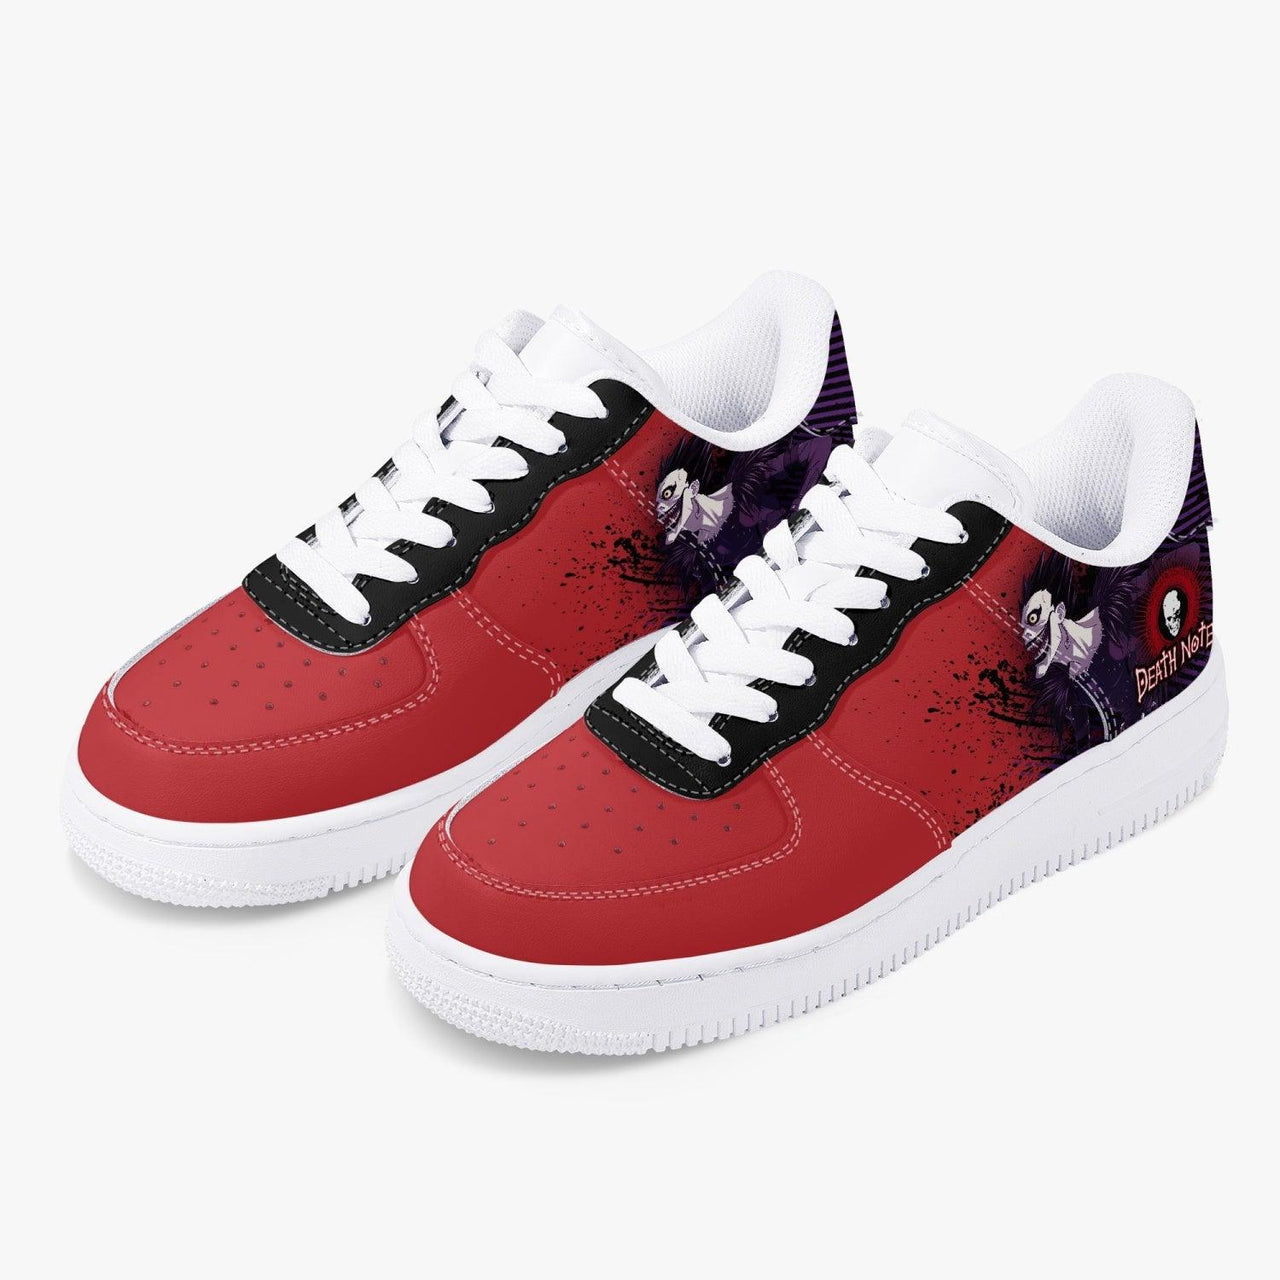 Death Note Ryuk Red AF1 Anime Shoes _ Death Note _ Ayuko